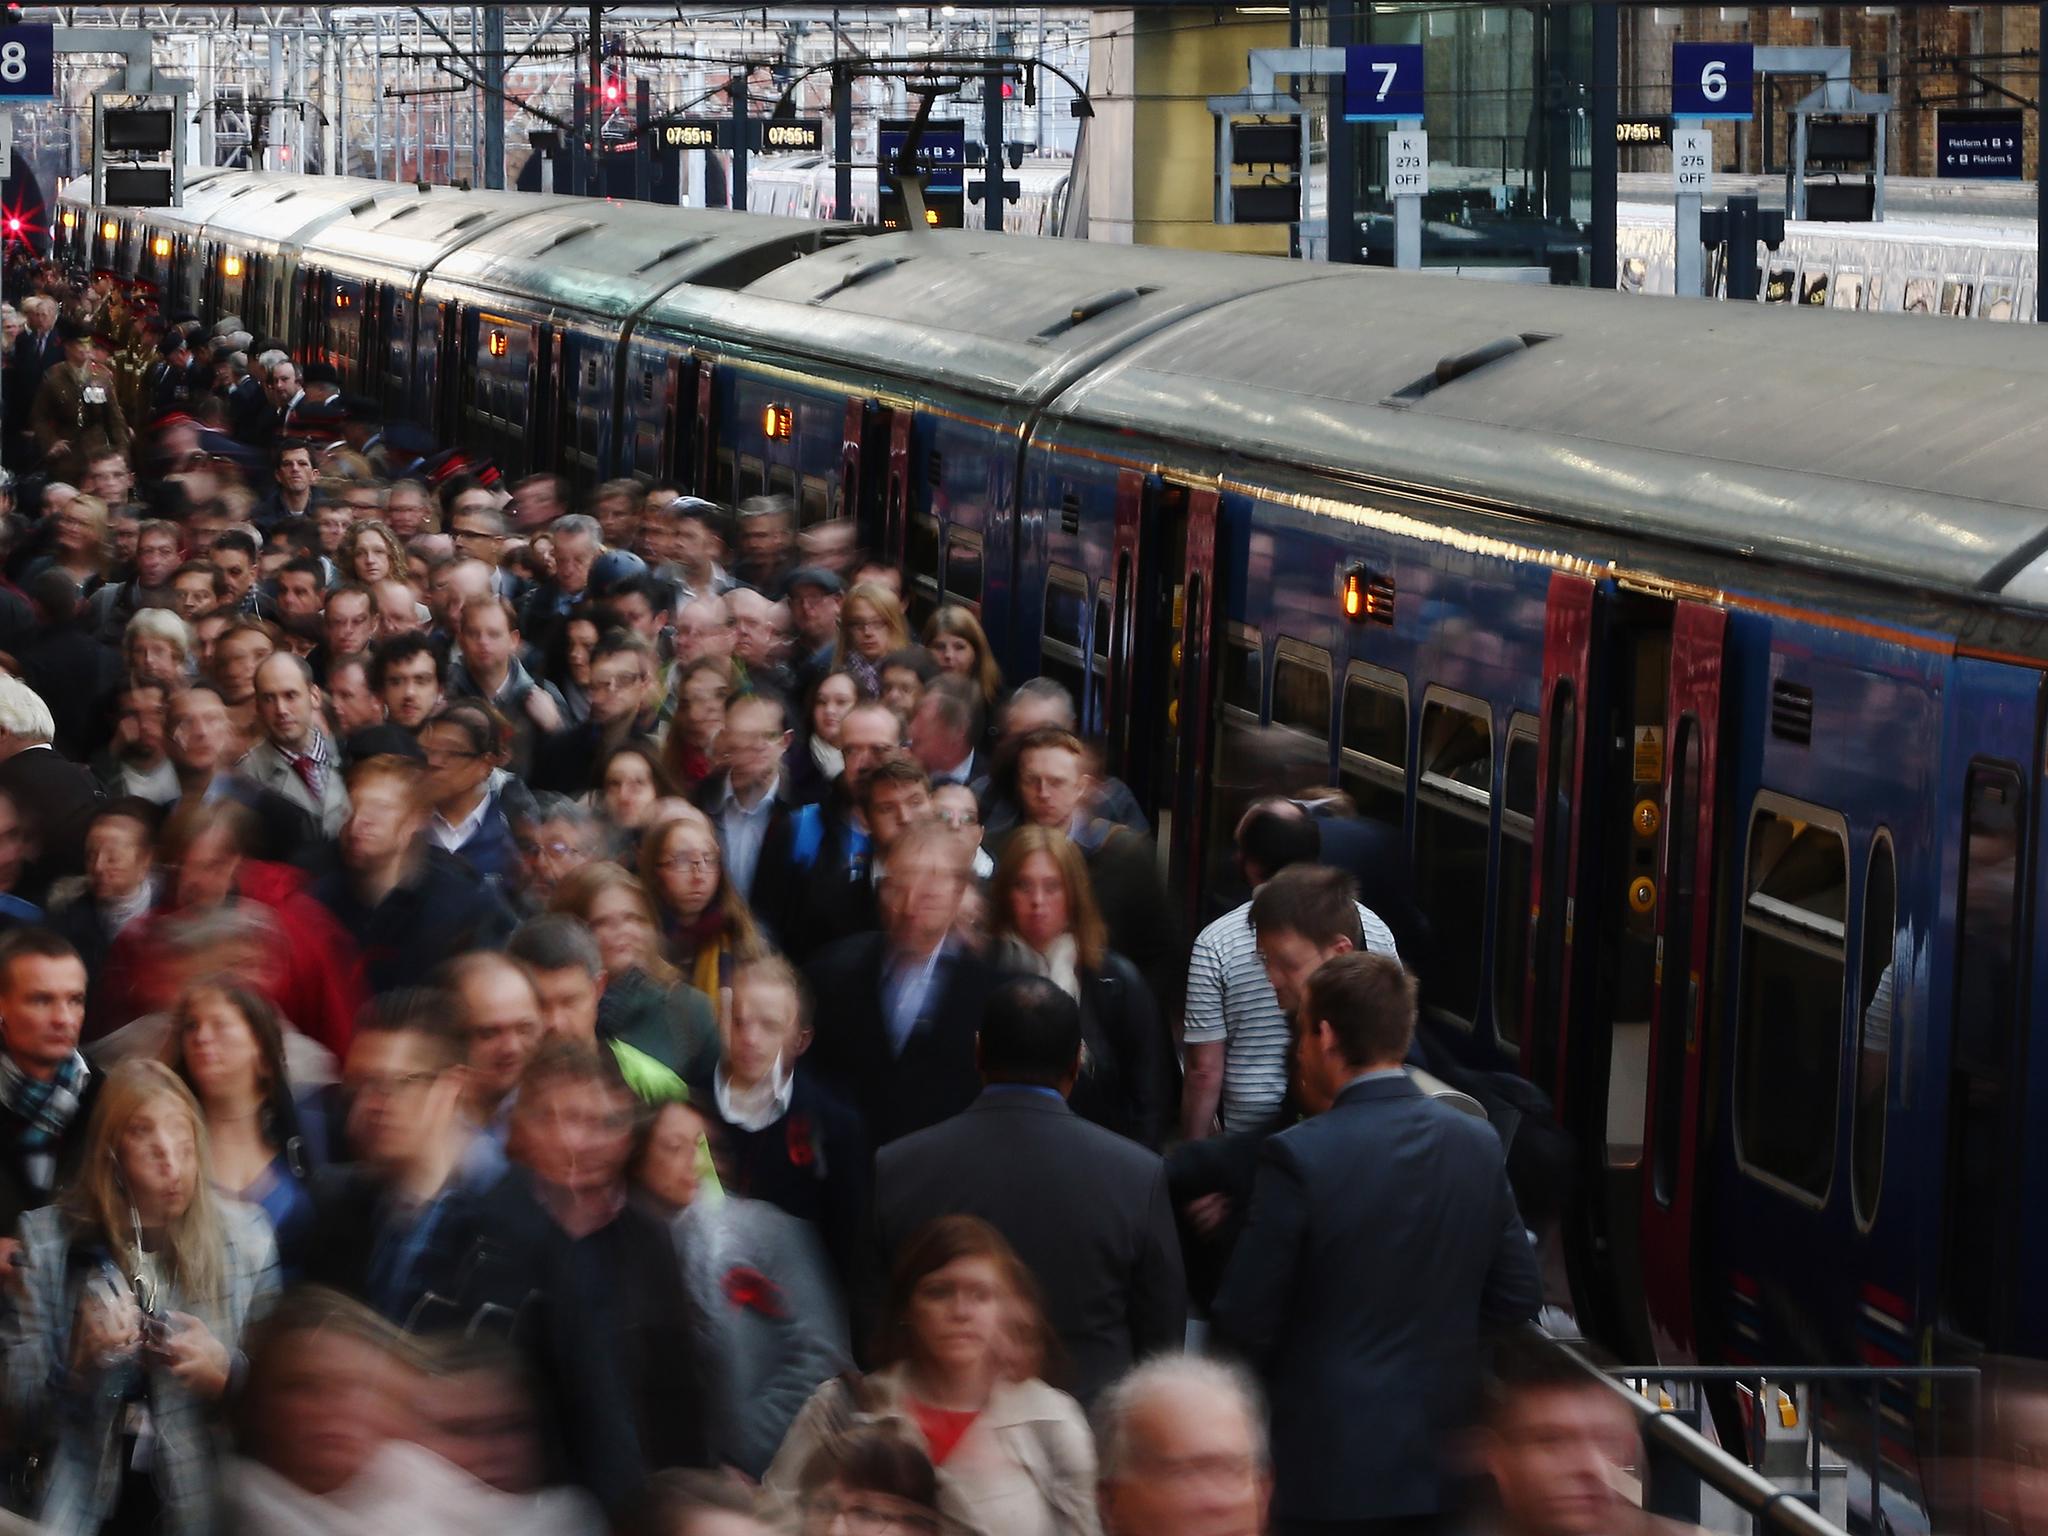 Passengers disembark a train at King's Cross station on November 7, 2014 in London, England